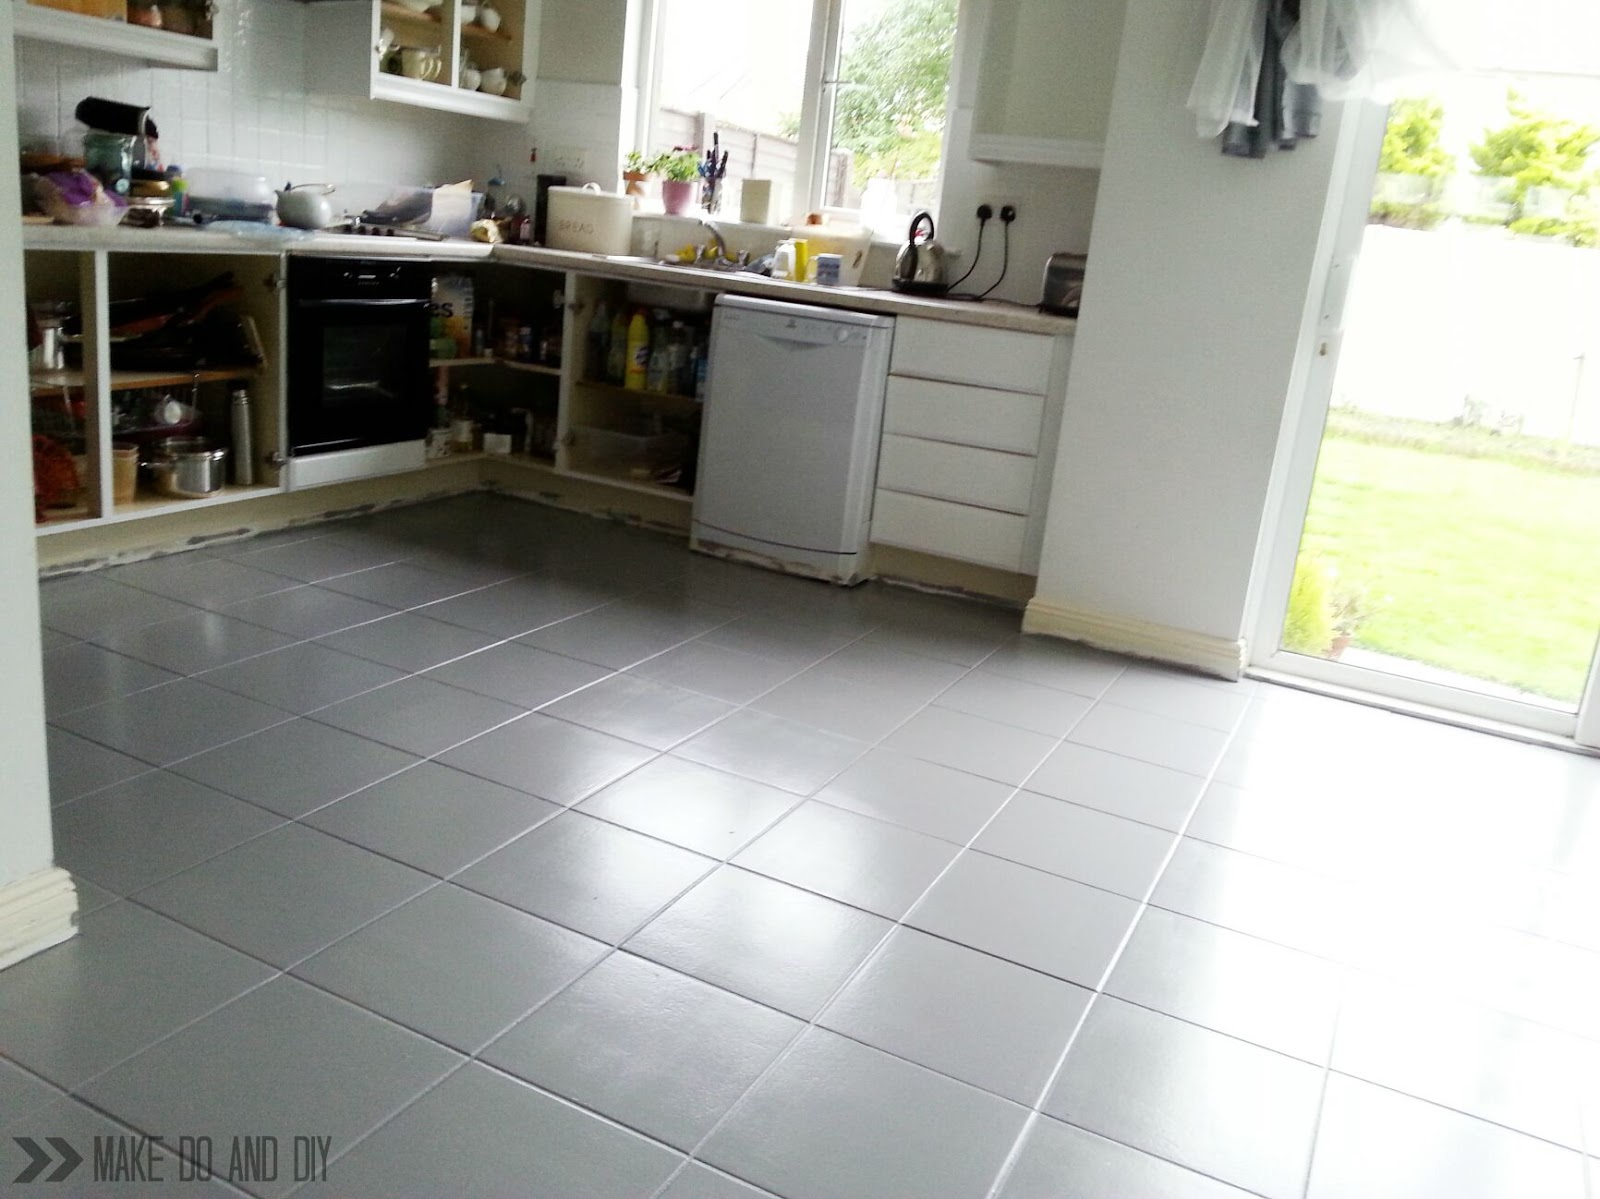 Painted Tile Floor No Really Make Do And Diy pertaining to dimensions 1600 X 1199